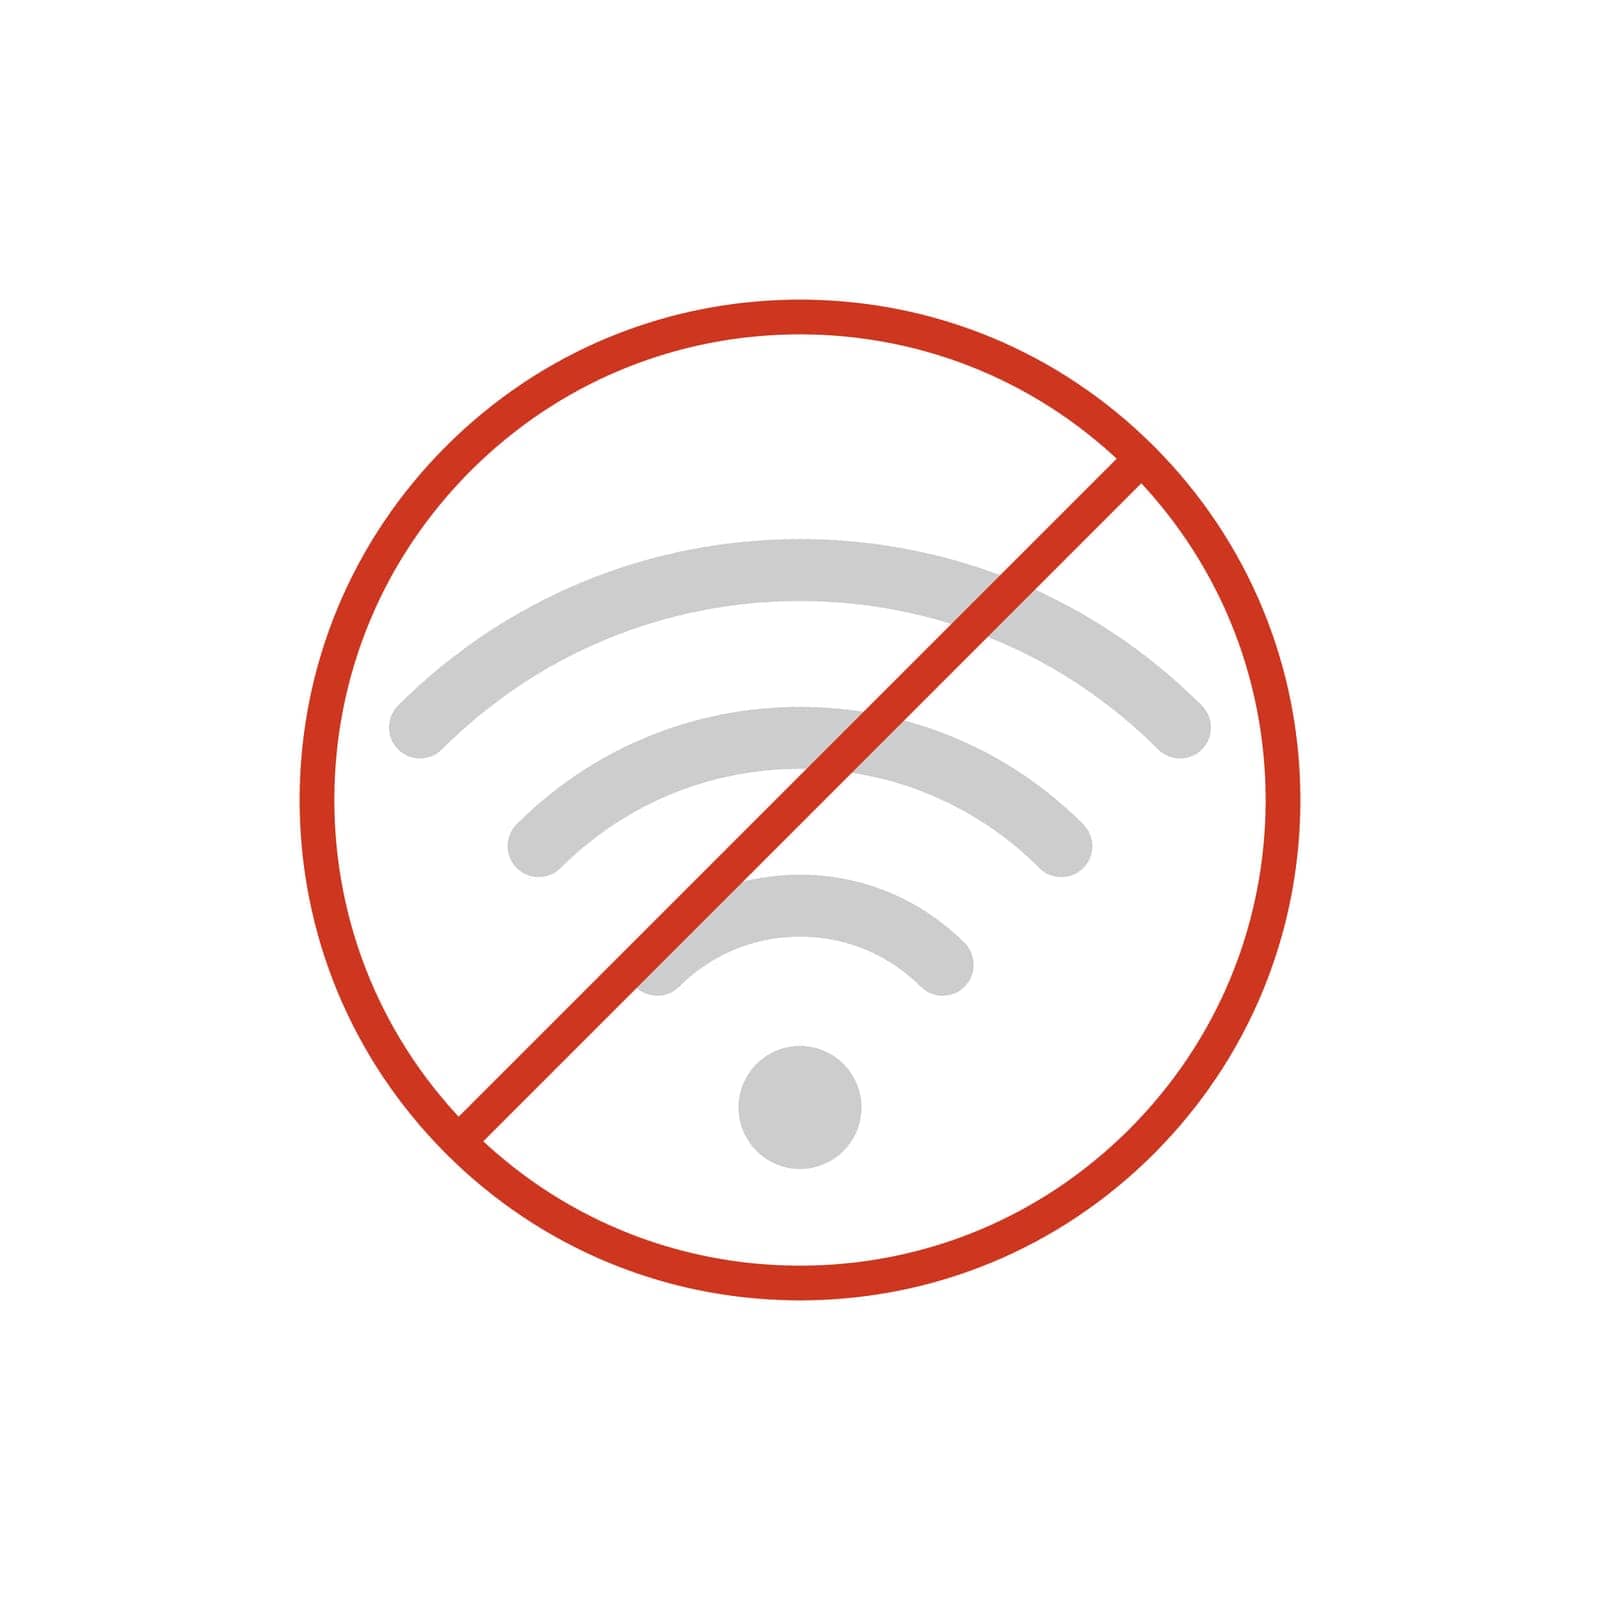 Internet connection error, no or bad signal pictogram by iconicprototype